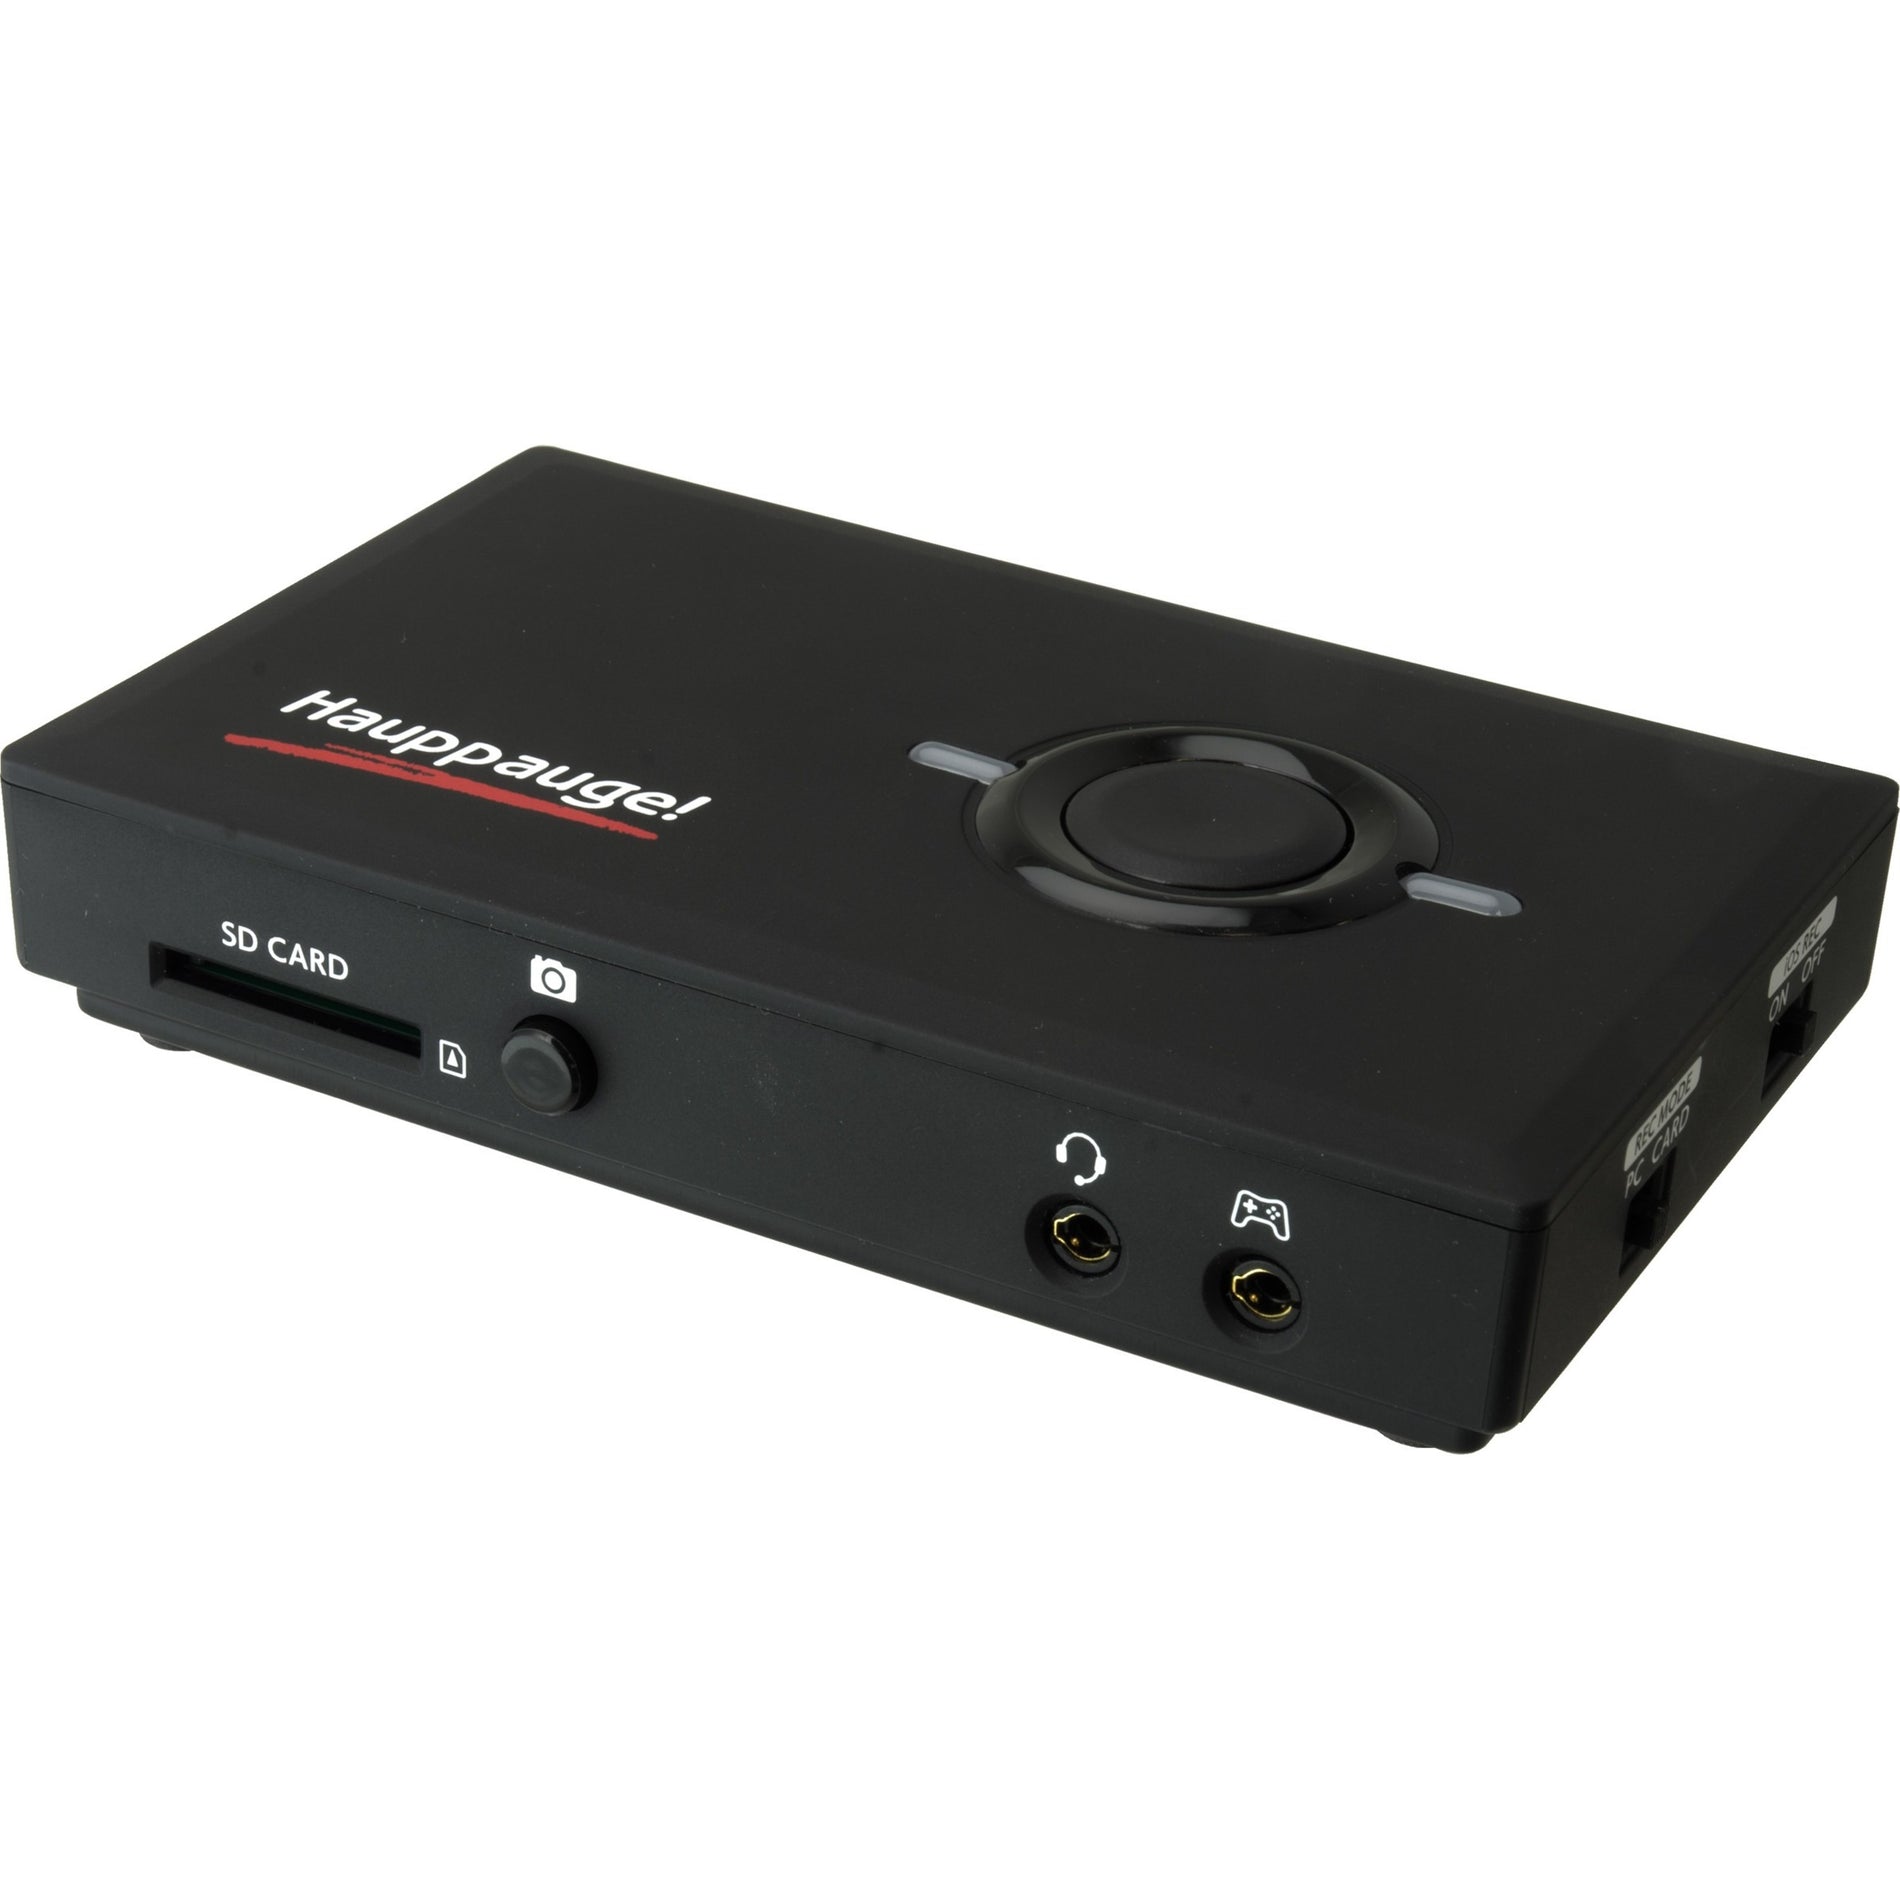 Hauppauge 1684 HD PVR Pro 60 High Definition 60fps H.264 Personal Video Recorder, USB 2.0